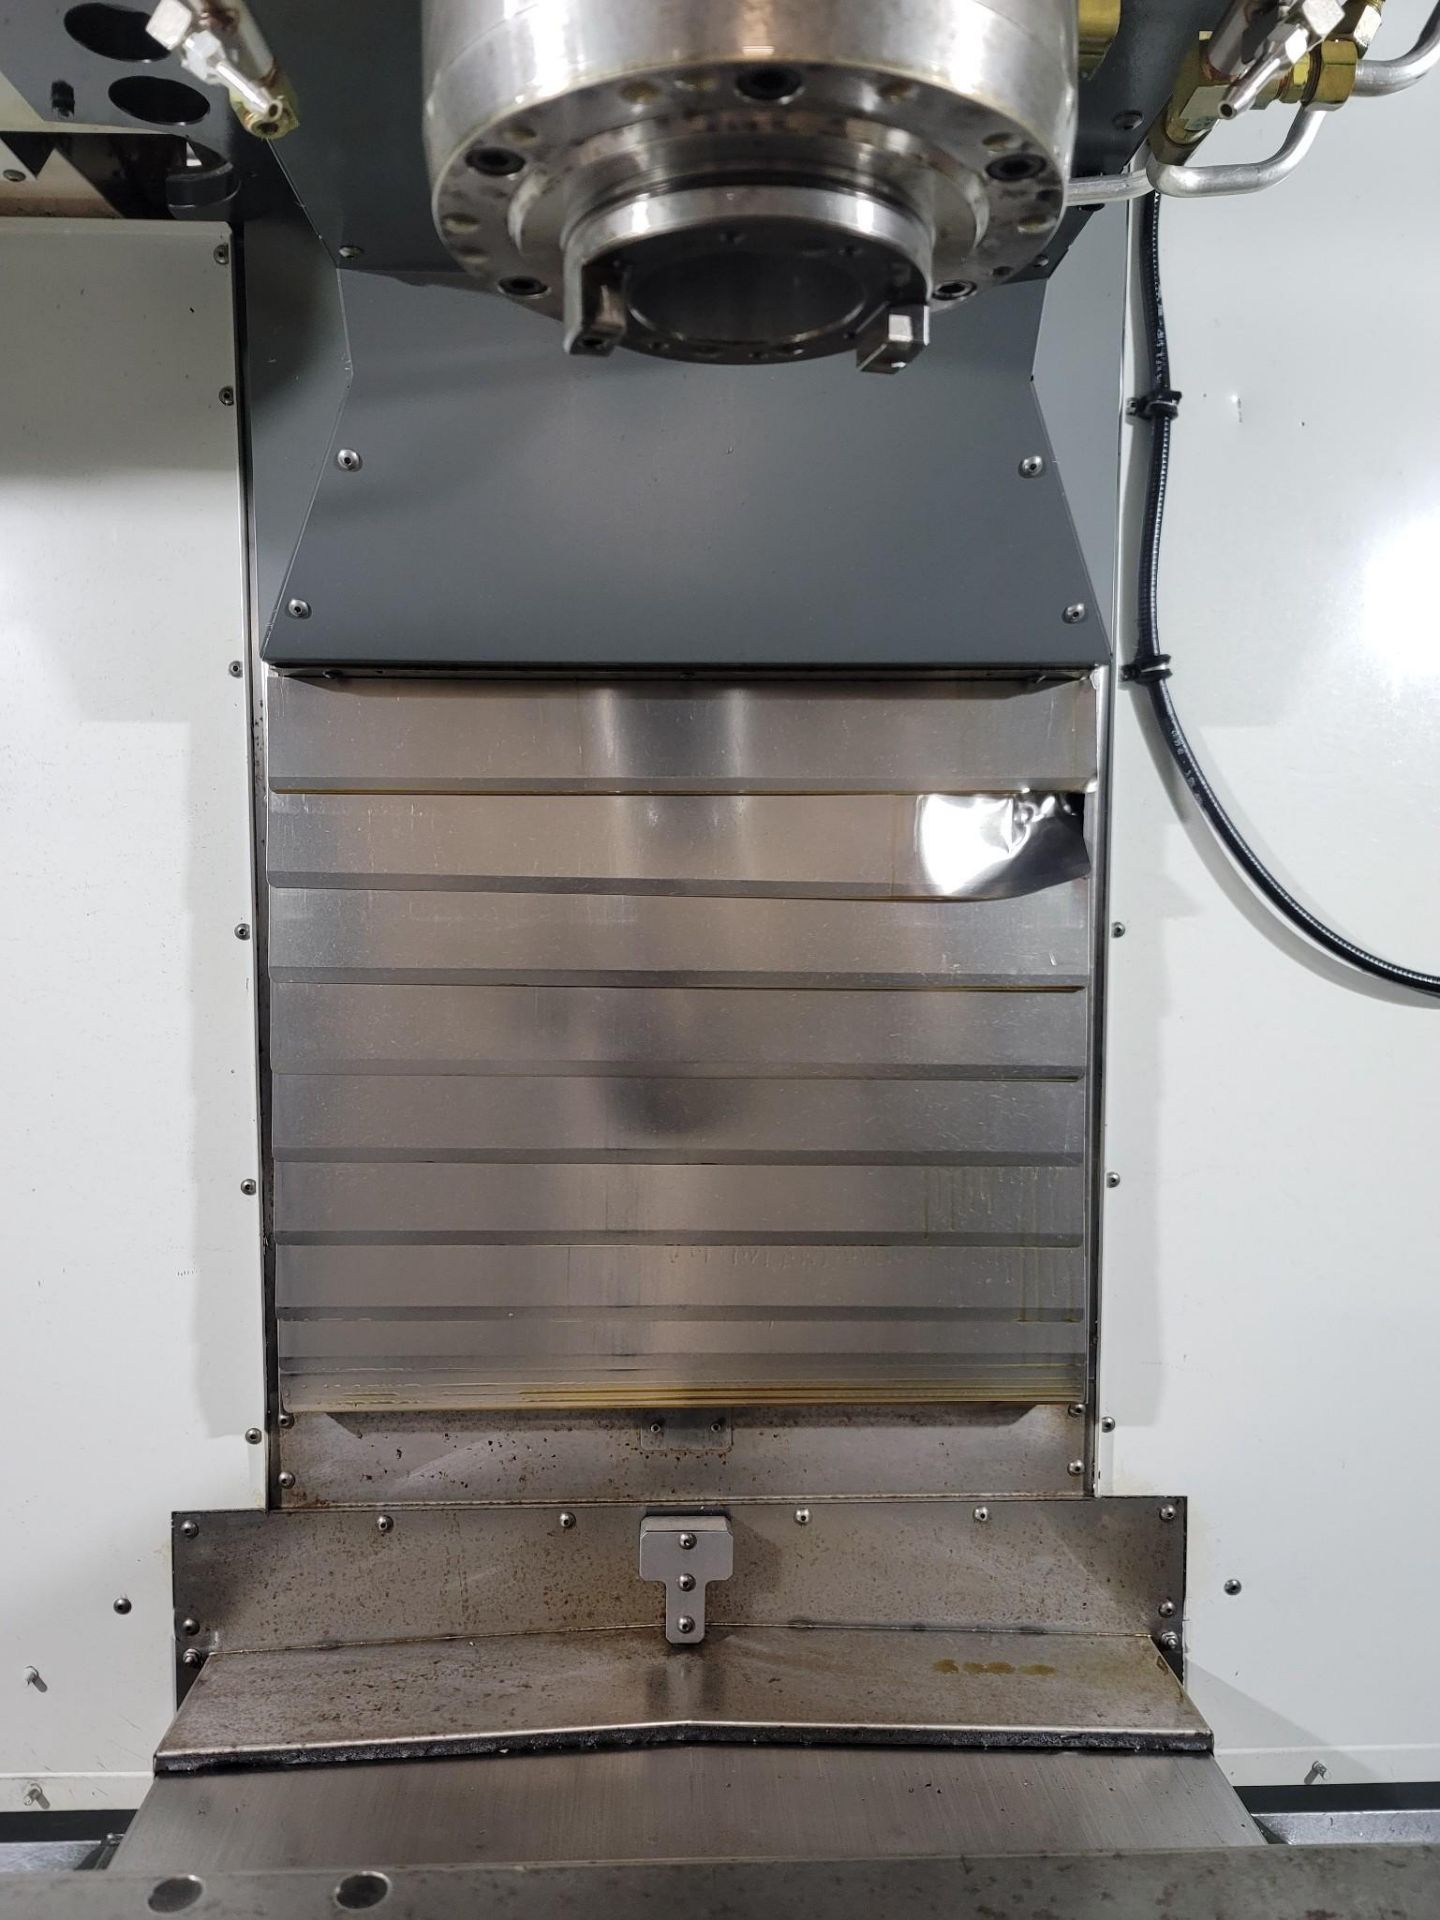 2019, Haas VF 3YT/ 50 Vertical Machining Center, VMC, S/N 1167708 - Image 26 of 42